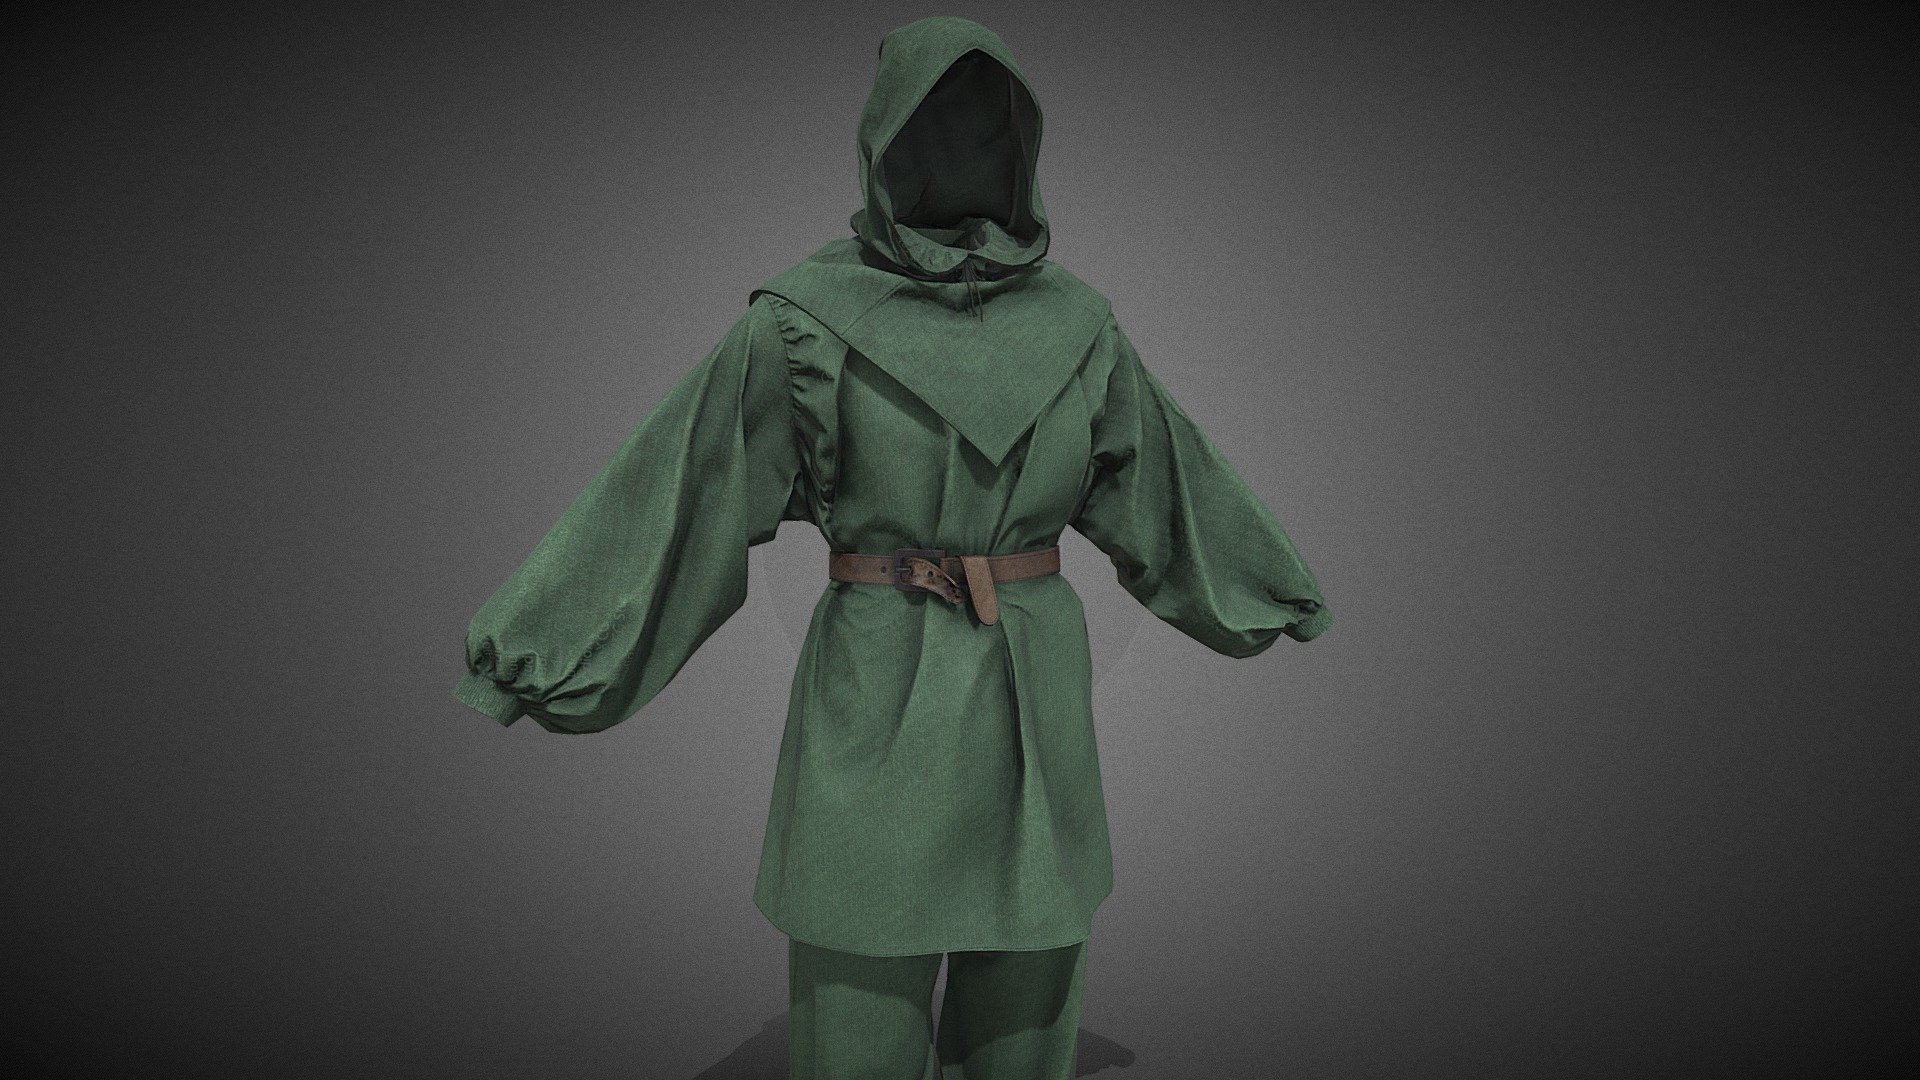 CG StudioX Present :
Green Medieval Outfit Lowpoly/PBR




This is Green Medieval Outfit Comes with Specular and Metalness PBR.

The photo been rendered using Marmoset Toolbag 4 (real time game engine )


Features :



Comes with Specular and Metalness PBR 4K texture .

Good topology.

Low polygon geometry.

The Model is prefect for game for both Specular workflow as in Unity and Metalness as in Unreal engine .

The model also rendered using Marmoset Toolbag 4 with both Specular and Metalness PBR and also included in the product with the full texture.

The texture can be easily adjustable .


Texture :



Four set of UV [Albedo -Normal-Metalness -Roughness-Gloss-Specular-Ao] (4096*4096)


Files :
Marmoset Toolbag 4 ,Maya,,FBX,glTF,Blender,OBj with all the textures.




Contact me for if you have any questions.
 - Green Medieval Outfit - Buy Royalty Free 3D model by CG StudioX (@CG_StudioX) 3d model